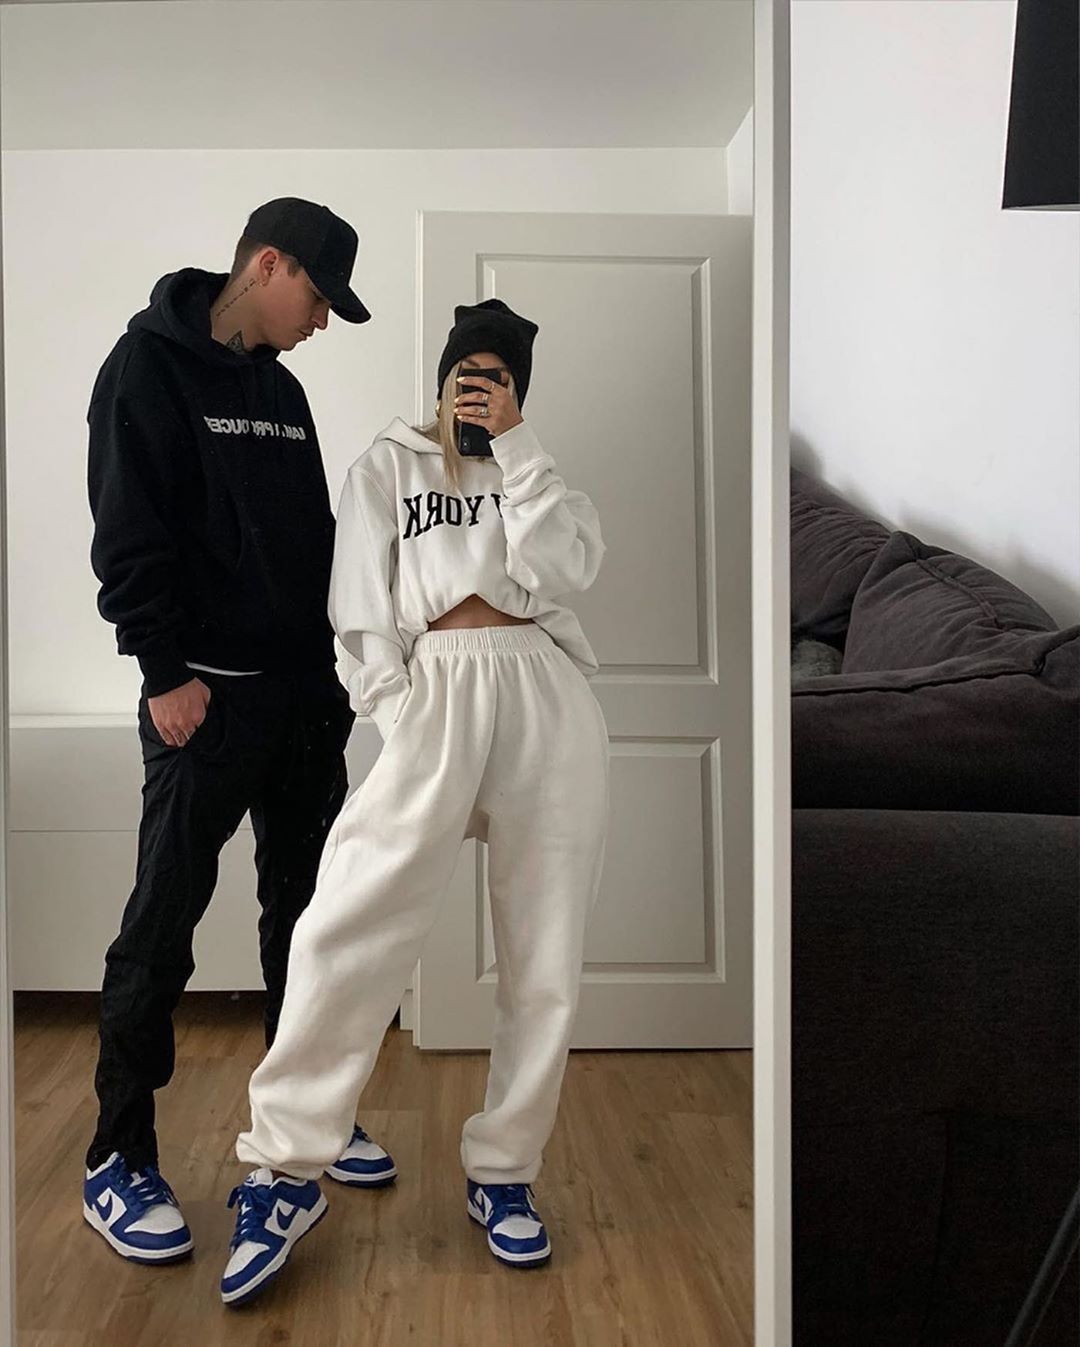 Streetwear on Instagram: “Couple styles 1, 2 or 3? | @lessiswore” - Streetwear on Instagram: “Couple styles 1, 2 or 3? | @lessiswore” -   13 fitness Outfits couple ideas